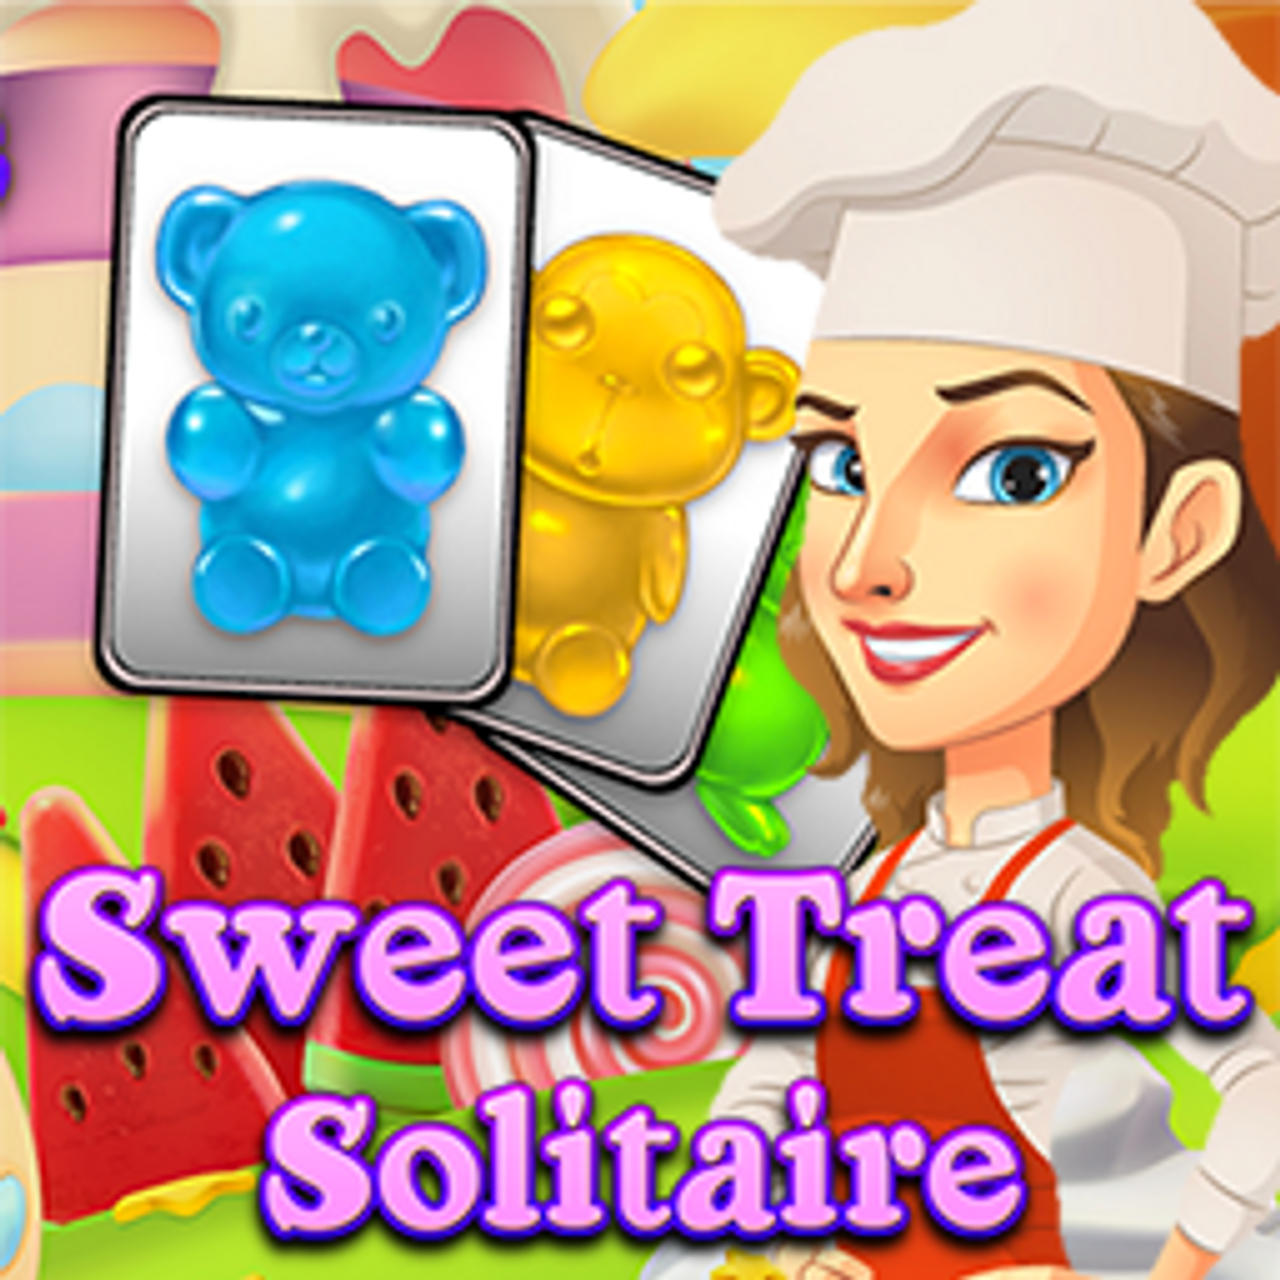 Sweet Treat Solitaire